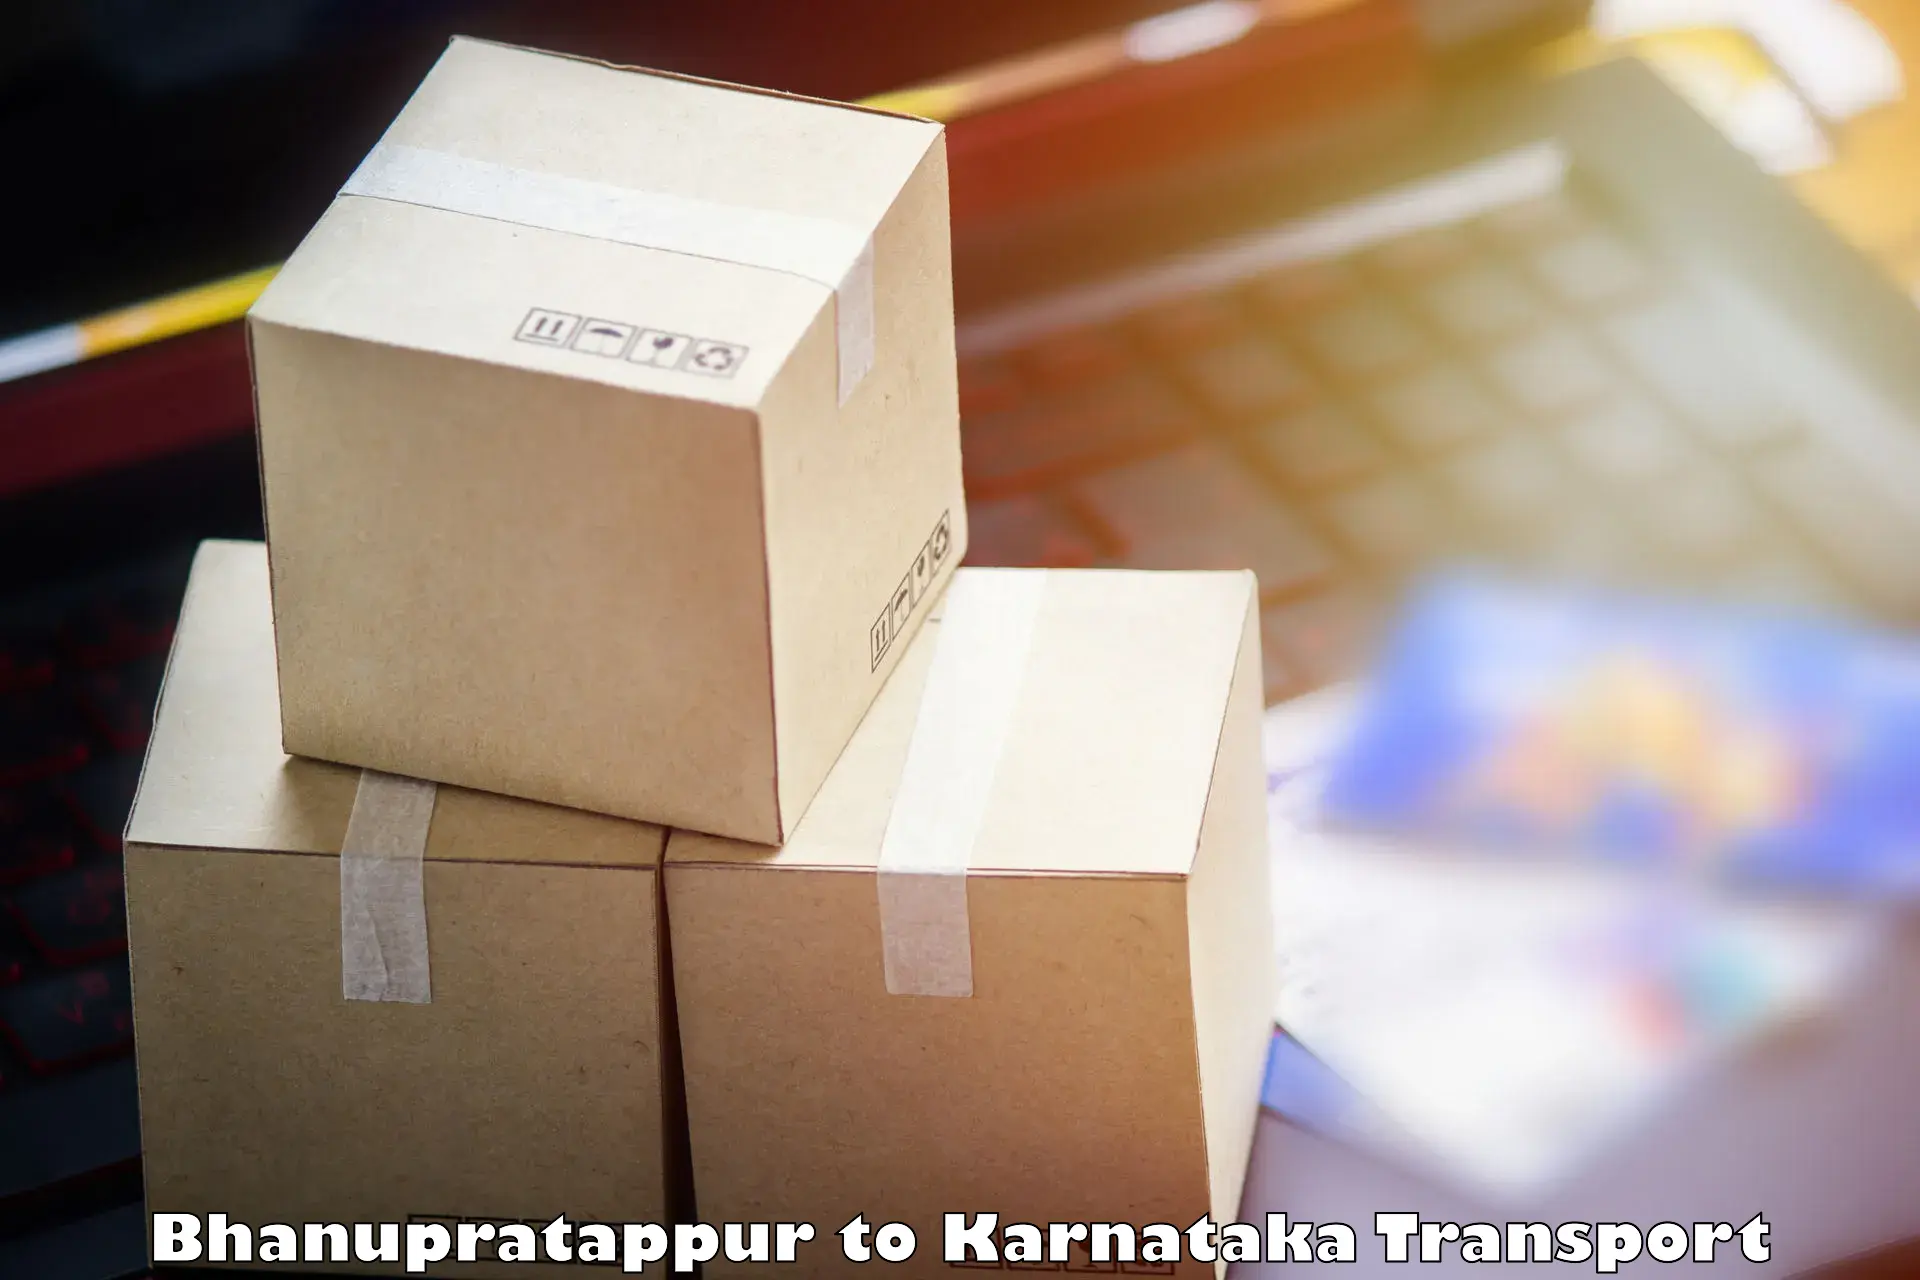 Goods delivery service Bhanupratappur to Dharwad